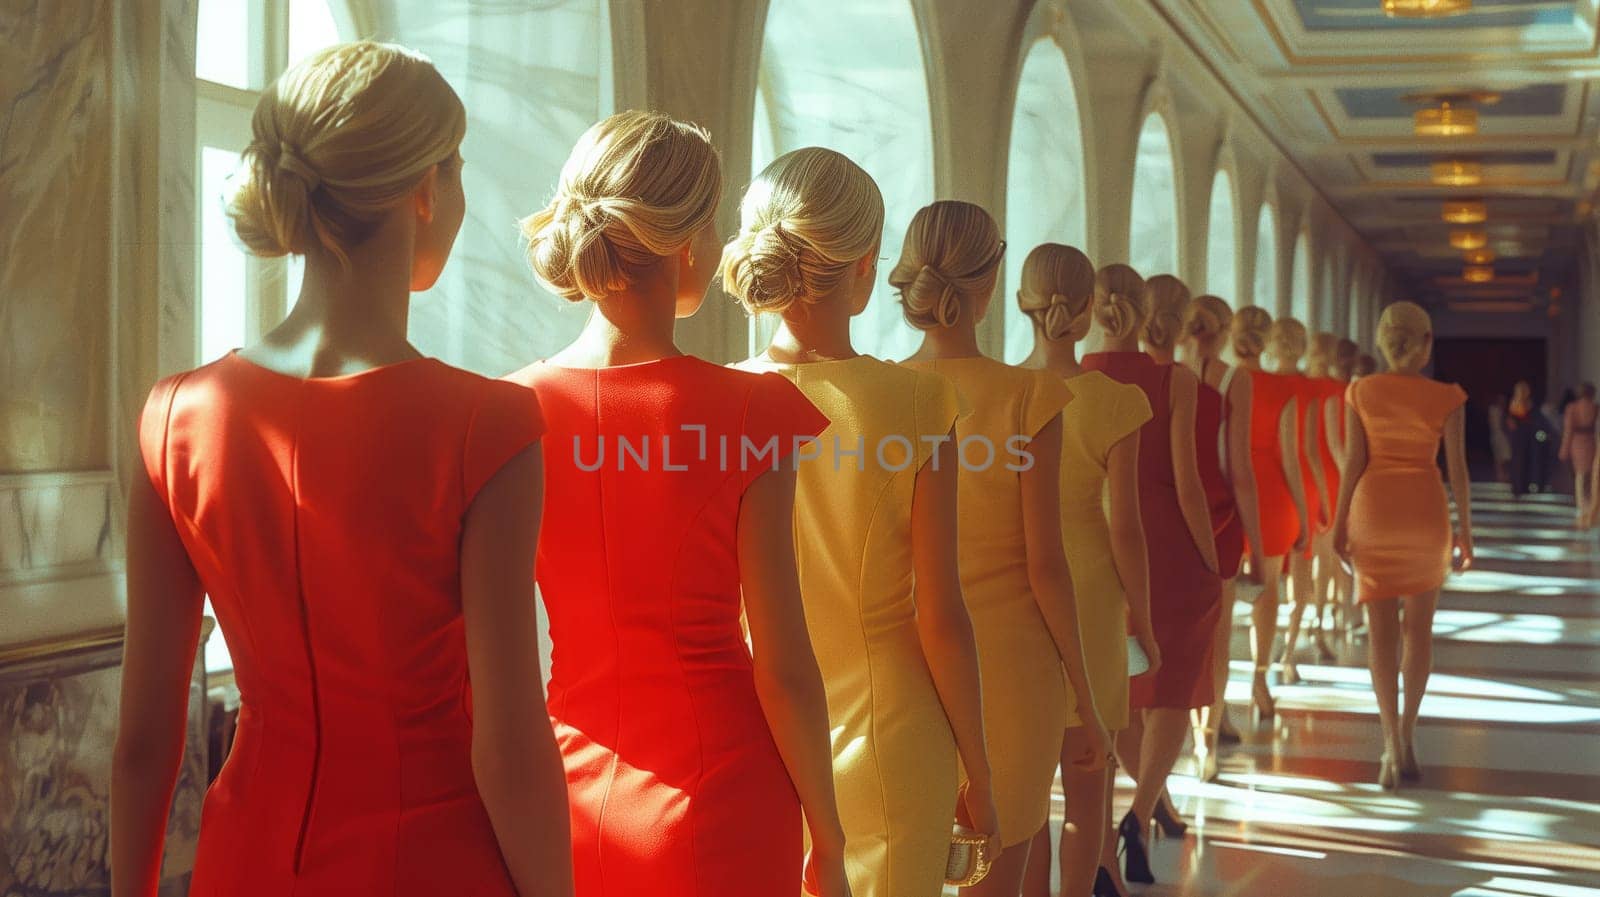 Women in vibrant red and yellow dresses stroll down the hallway by richwolf